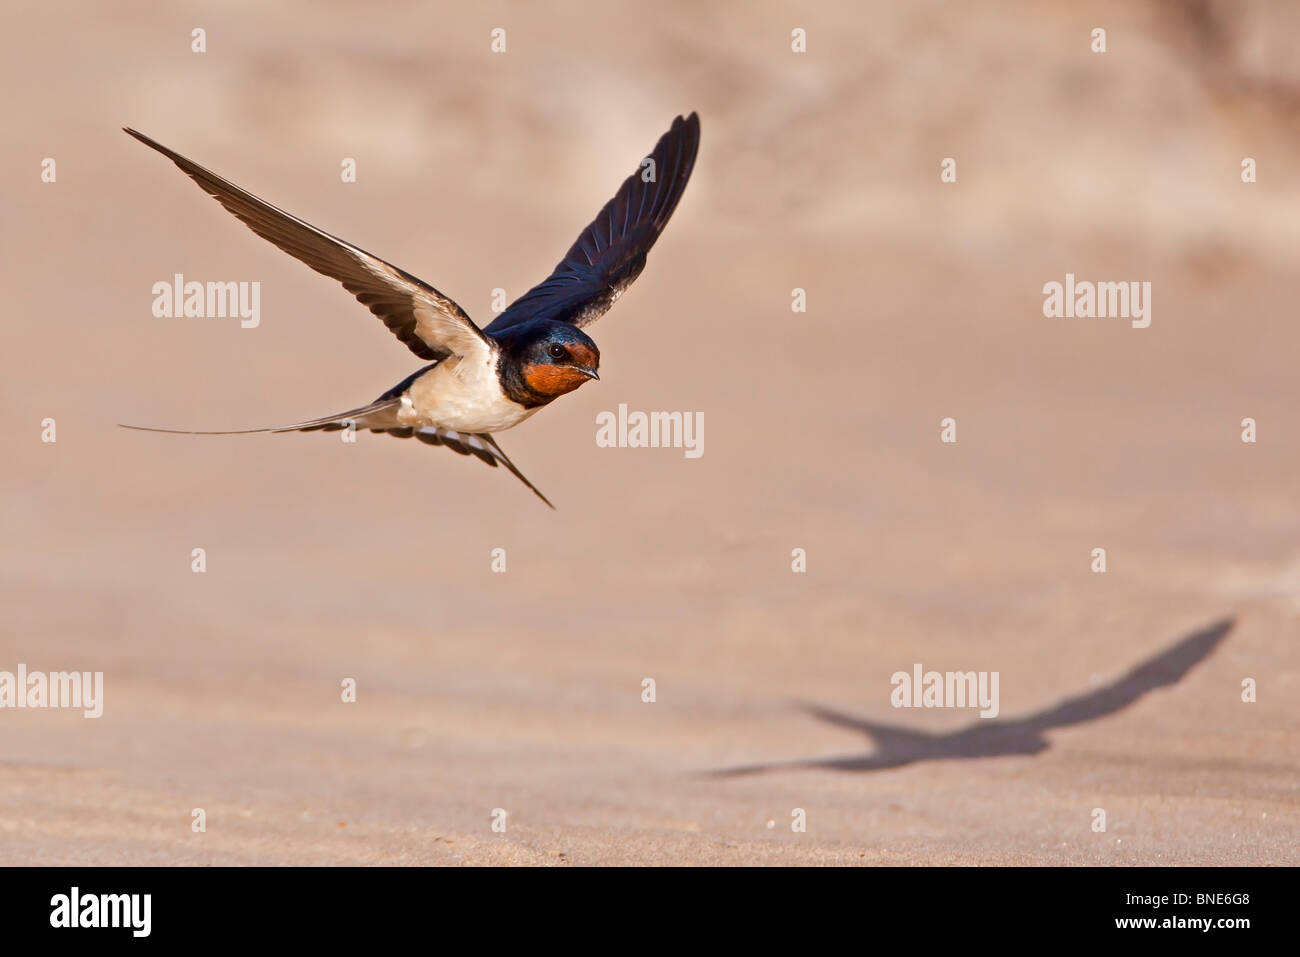 Swallow flying low over a sandy beach with a shadow. Stock Photo